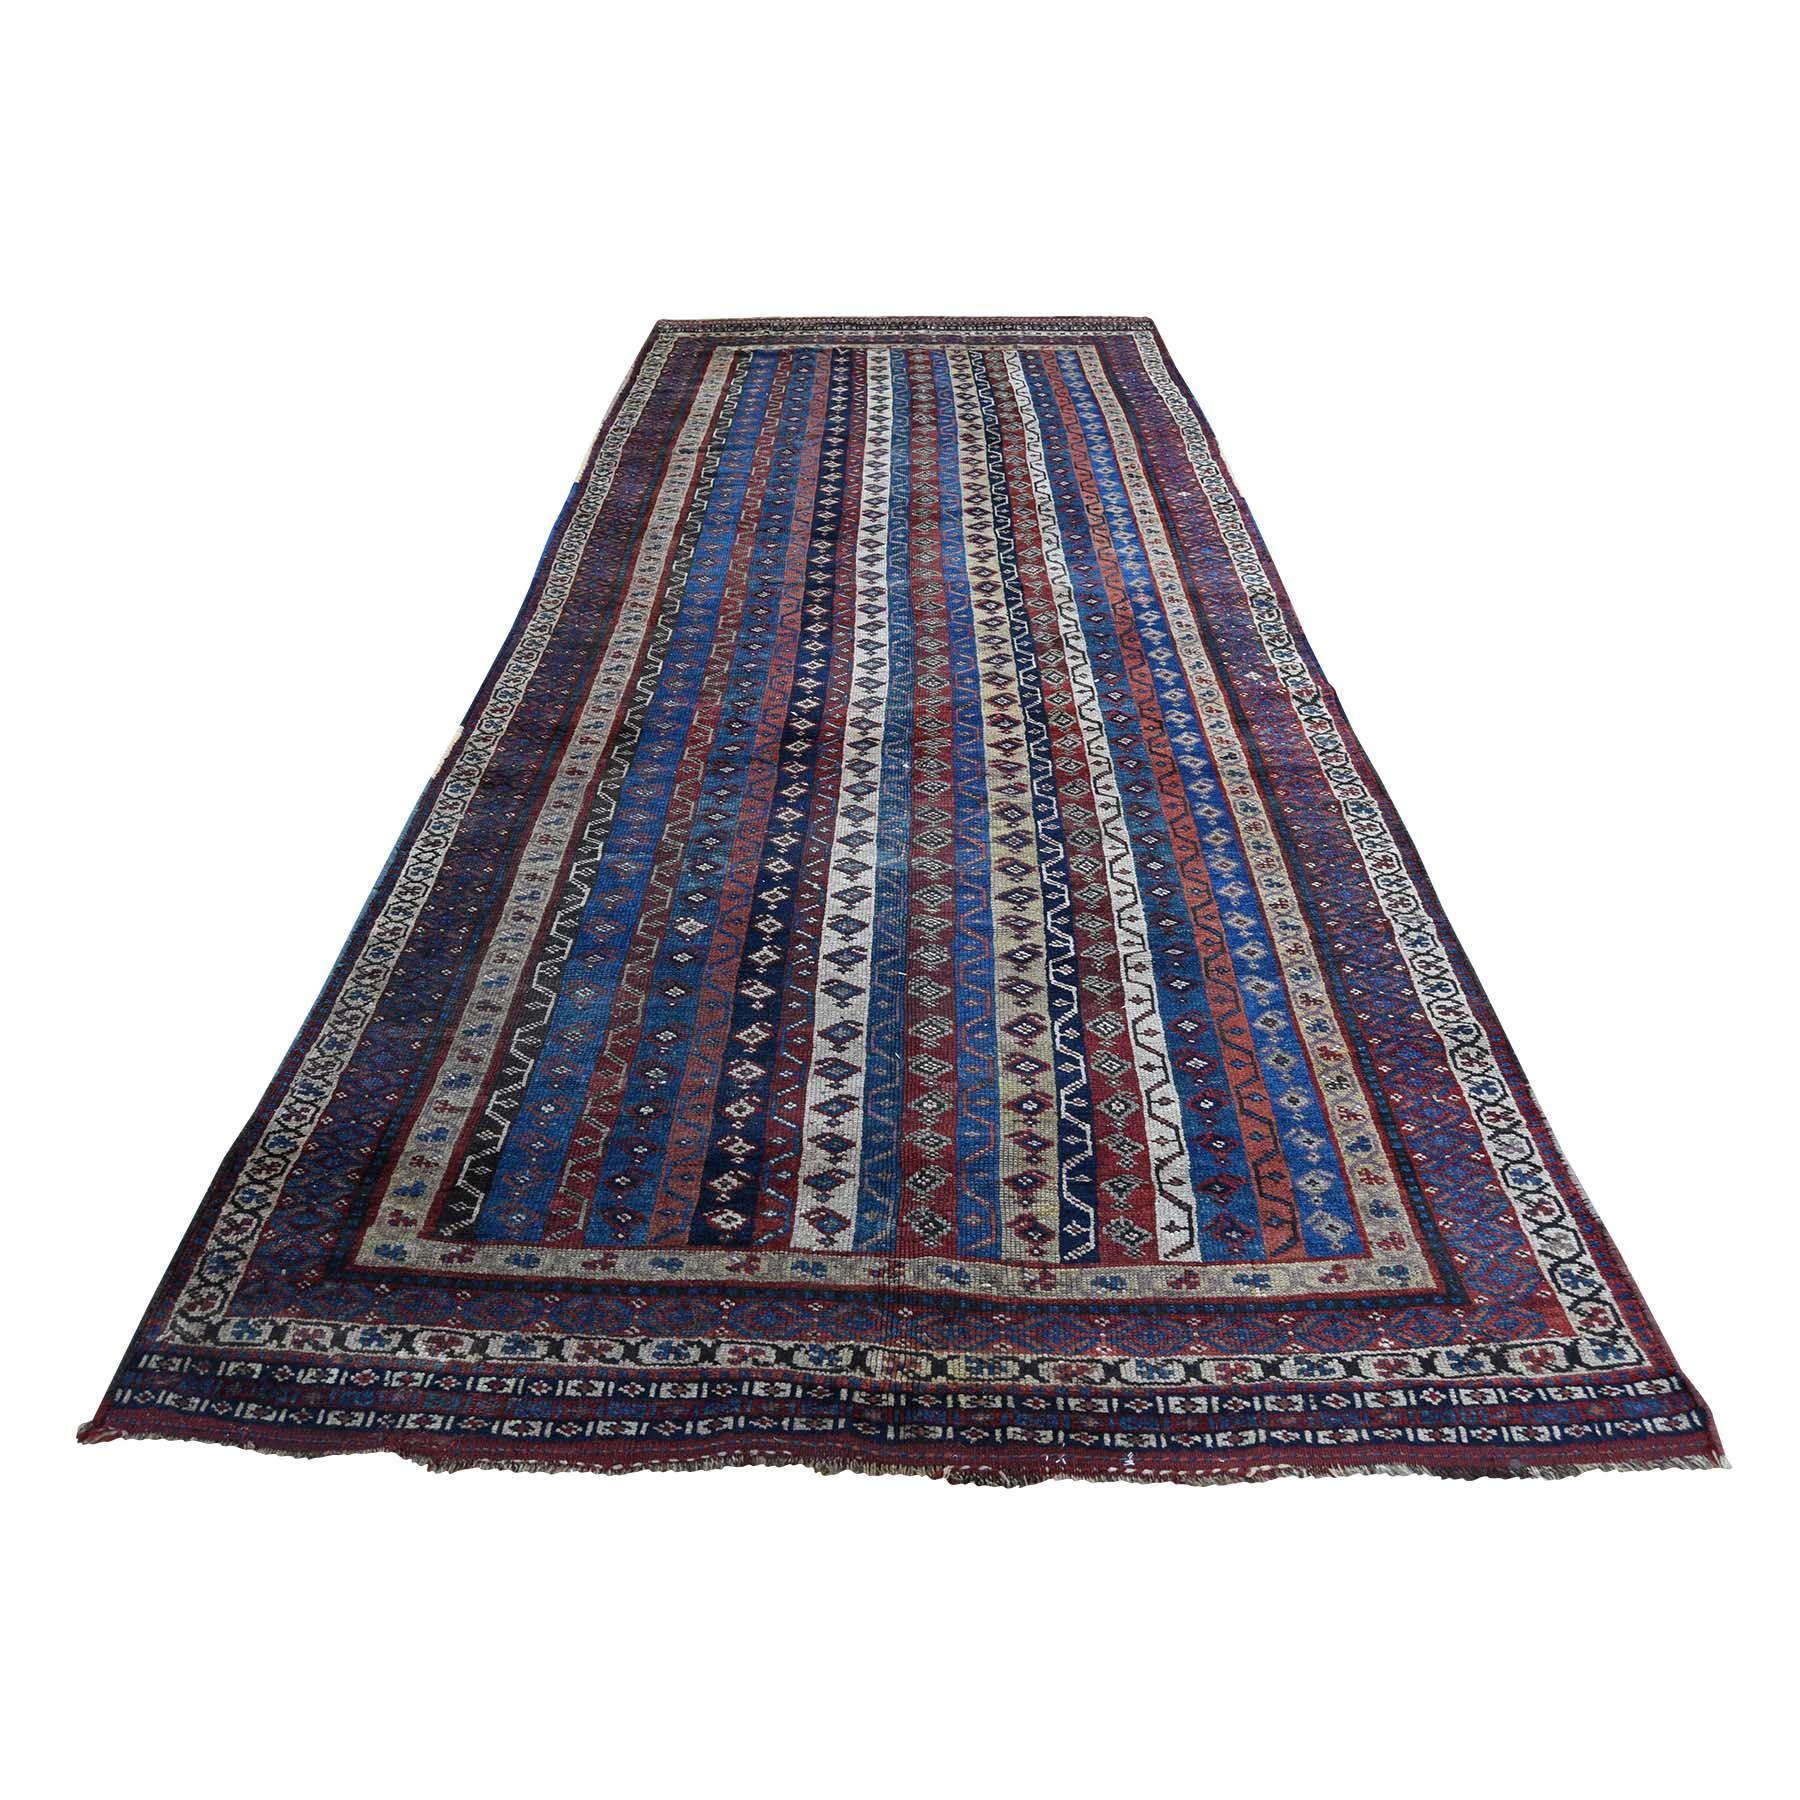 Late 19th Century Antique Persian Tribal Lori Buft Rug Shawl Des For Sale